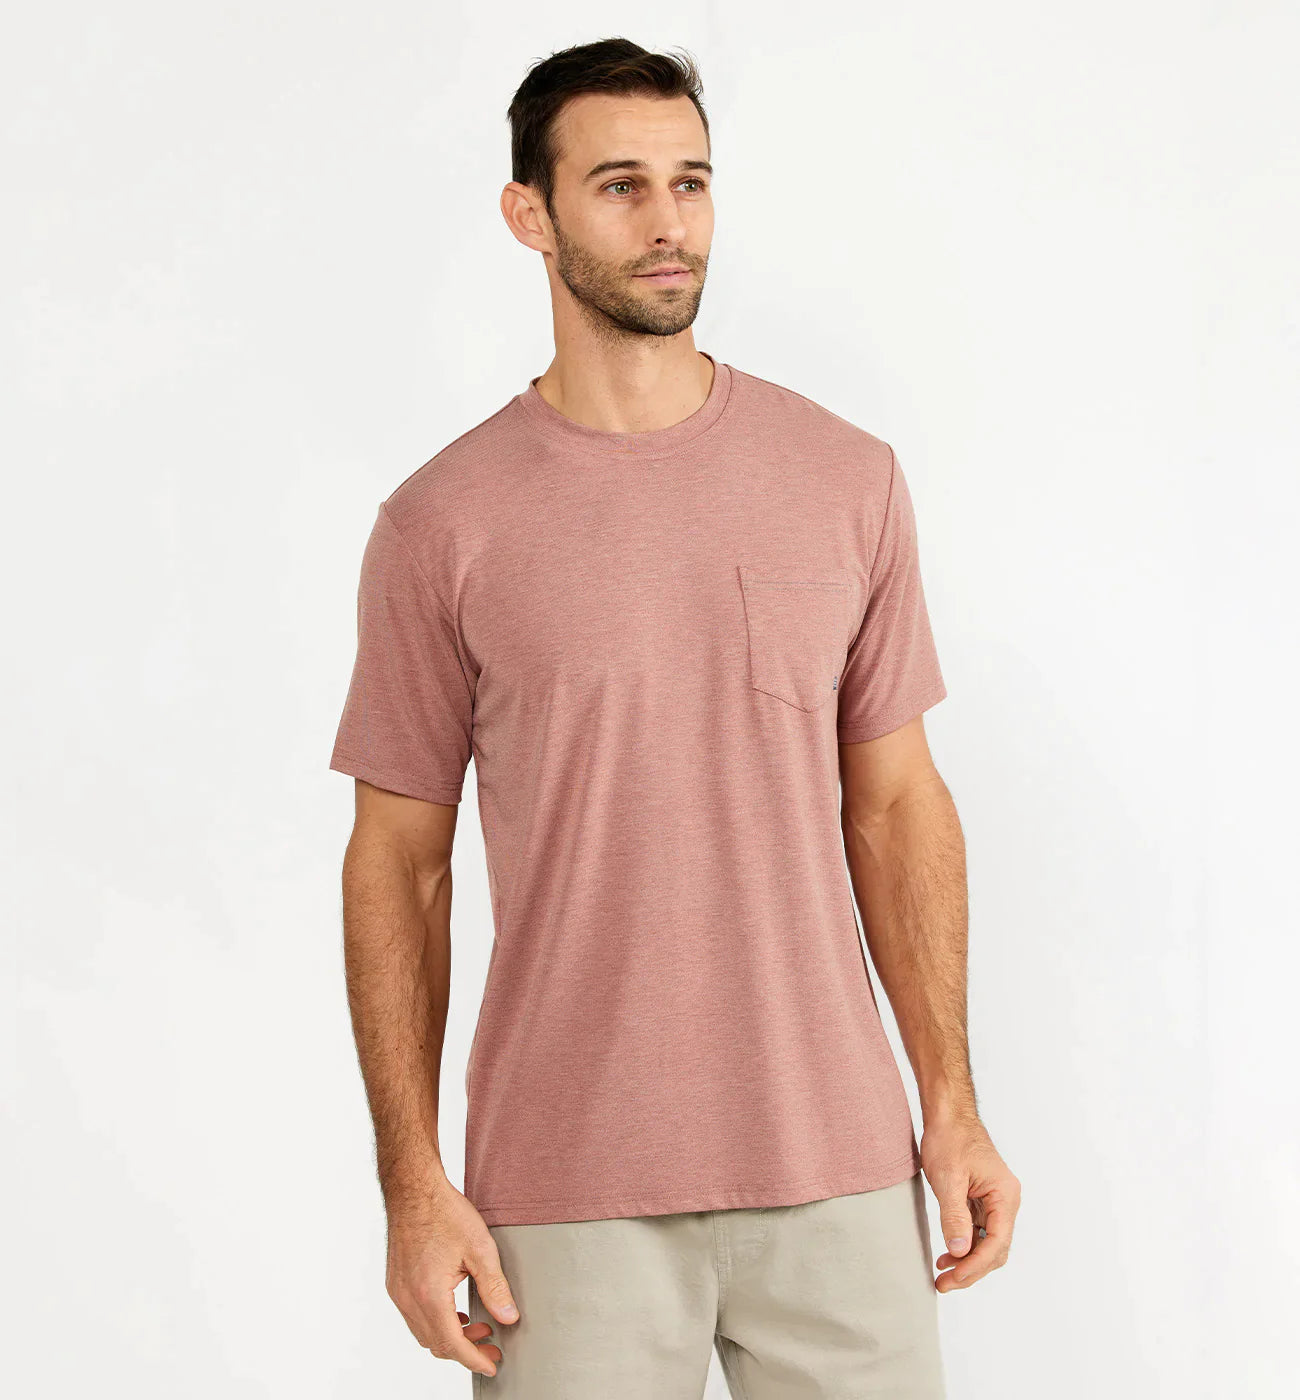 Men's Free Fly Apparel - Southern Sol